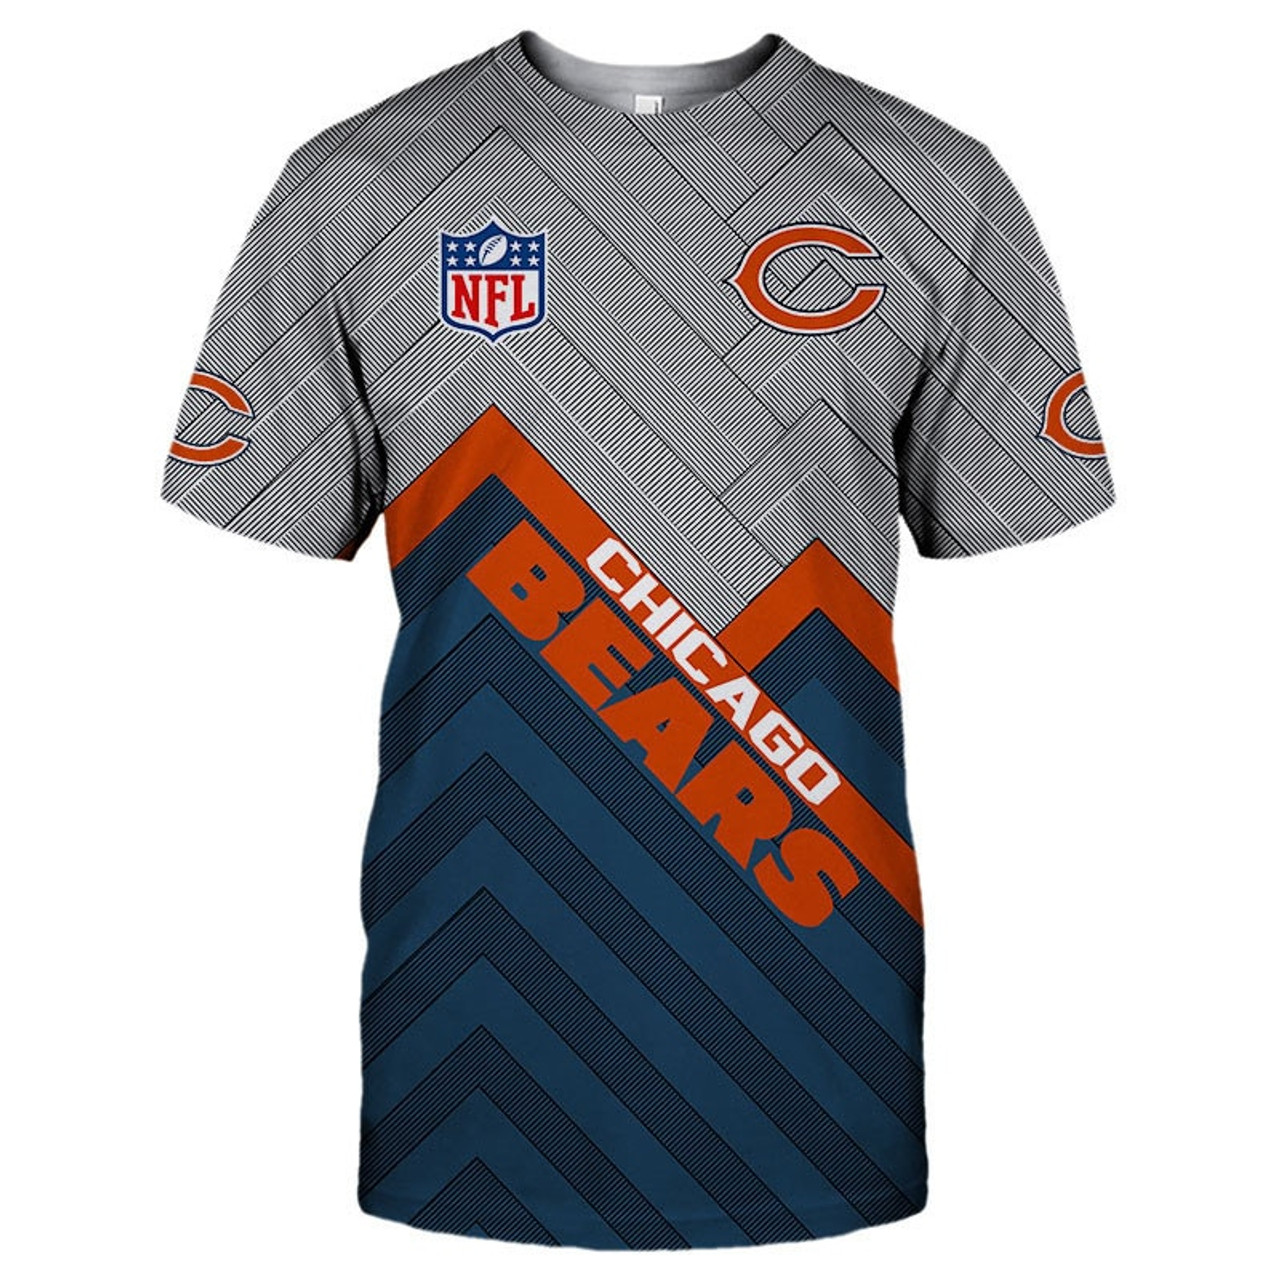  **(NEW-OFFICIAL-N.F.L.CHICAGO-BEARS-TEAM-TEES/NICE-3D-CUSTOM-BEARS-LOGOS & OFFICIAL-BEARS-CLASSIC-TEAM-COLORS/NICE-3D-DETAILED-GRAPHIC-PRINTED-DOUBLE-SIDED/ALL-OVER-ENTIRE-TEE-SHIRT-PRINTED-DESIGN/TRENDY-PREMIUM-N.F.L.CHICAGO-BEARS-TEES)**